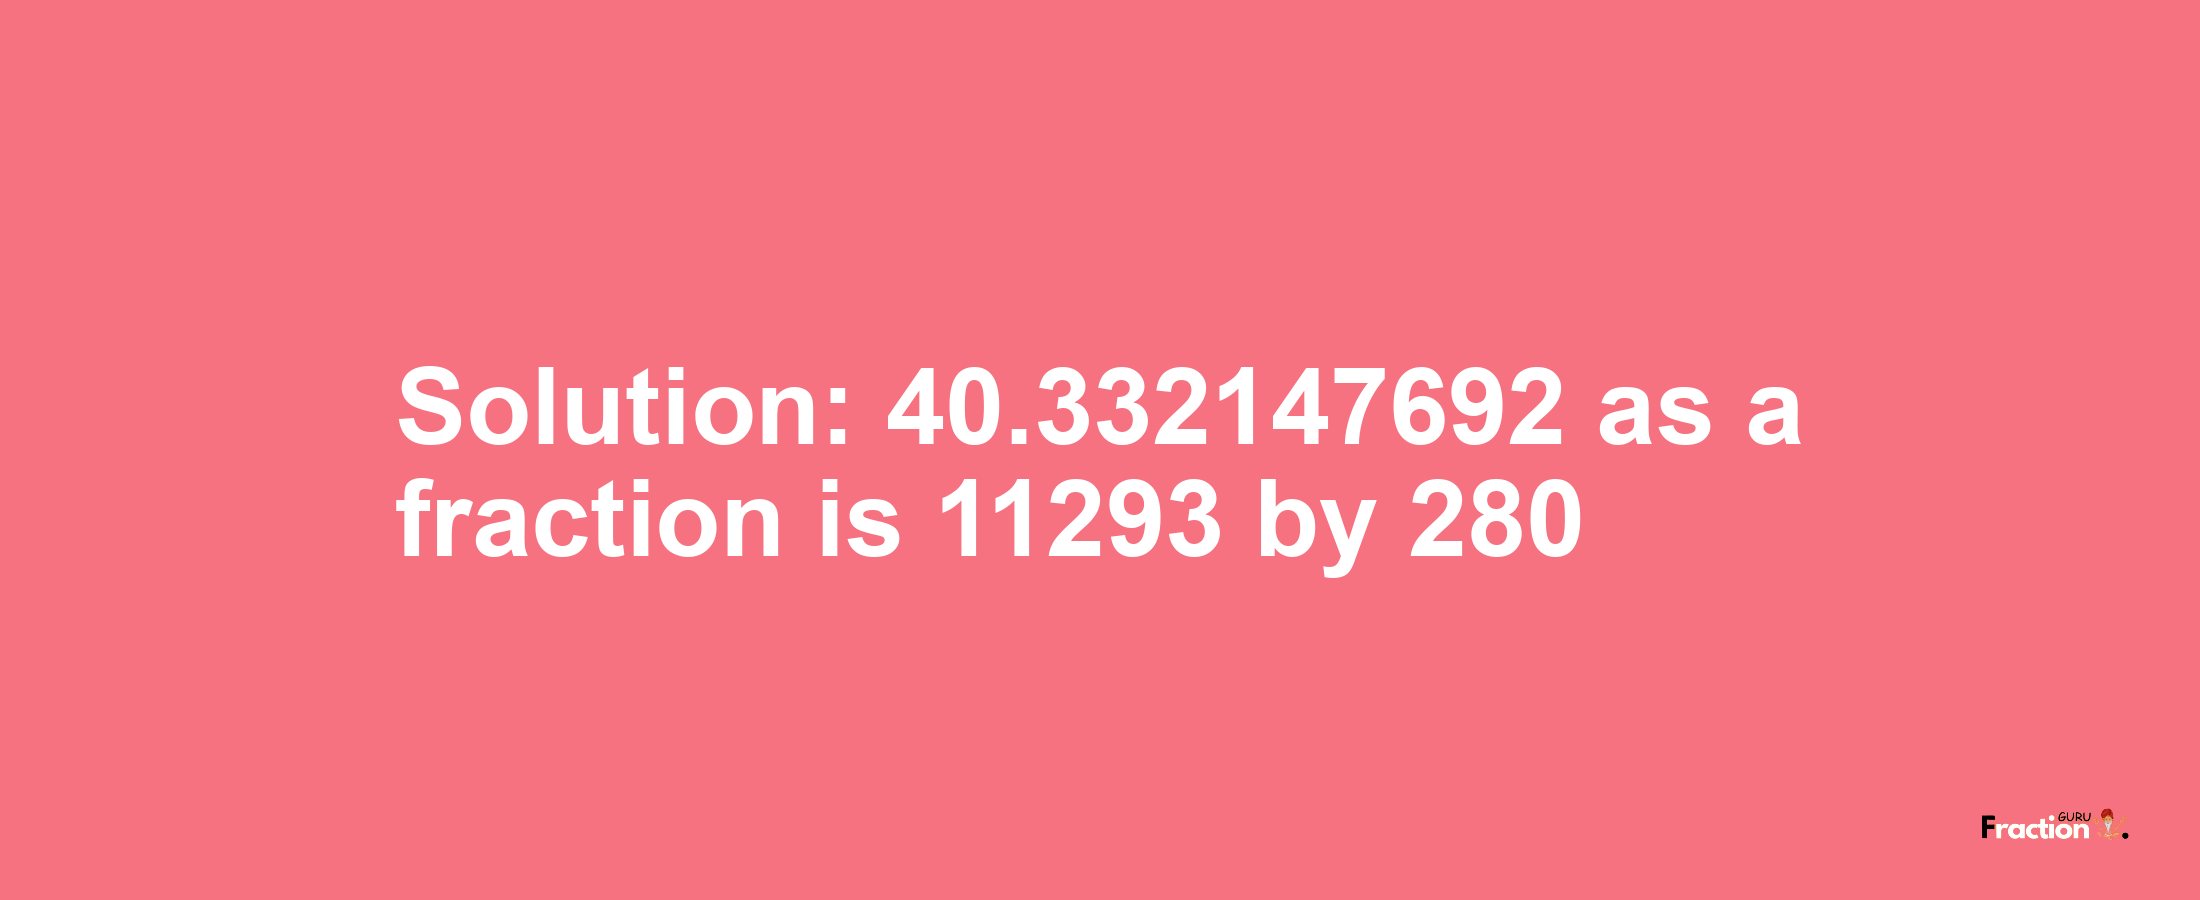 Solution:40.332147692 as a fraction is 11293/280